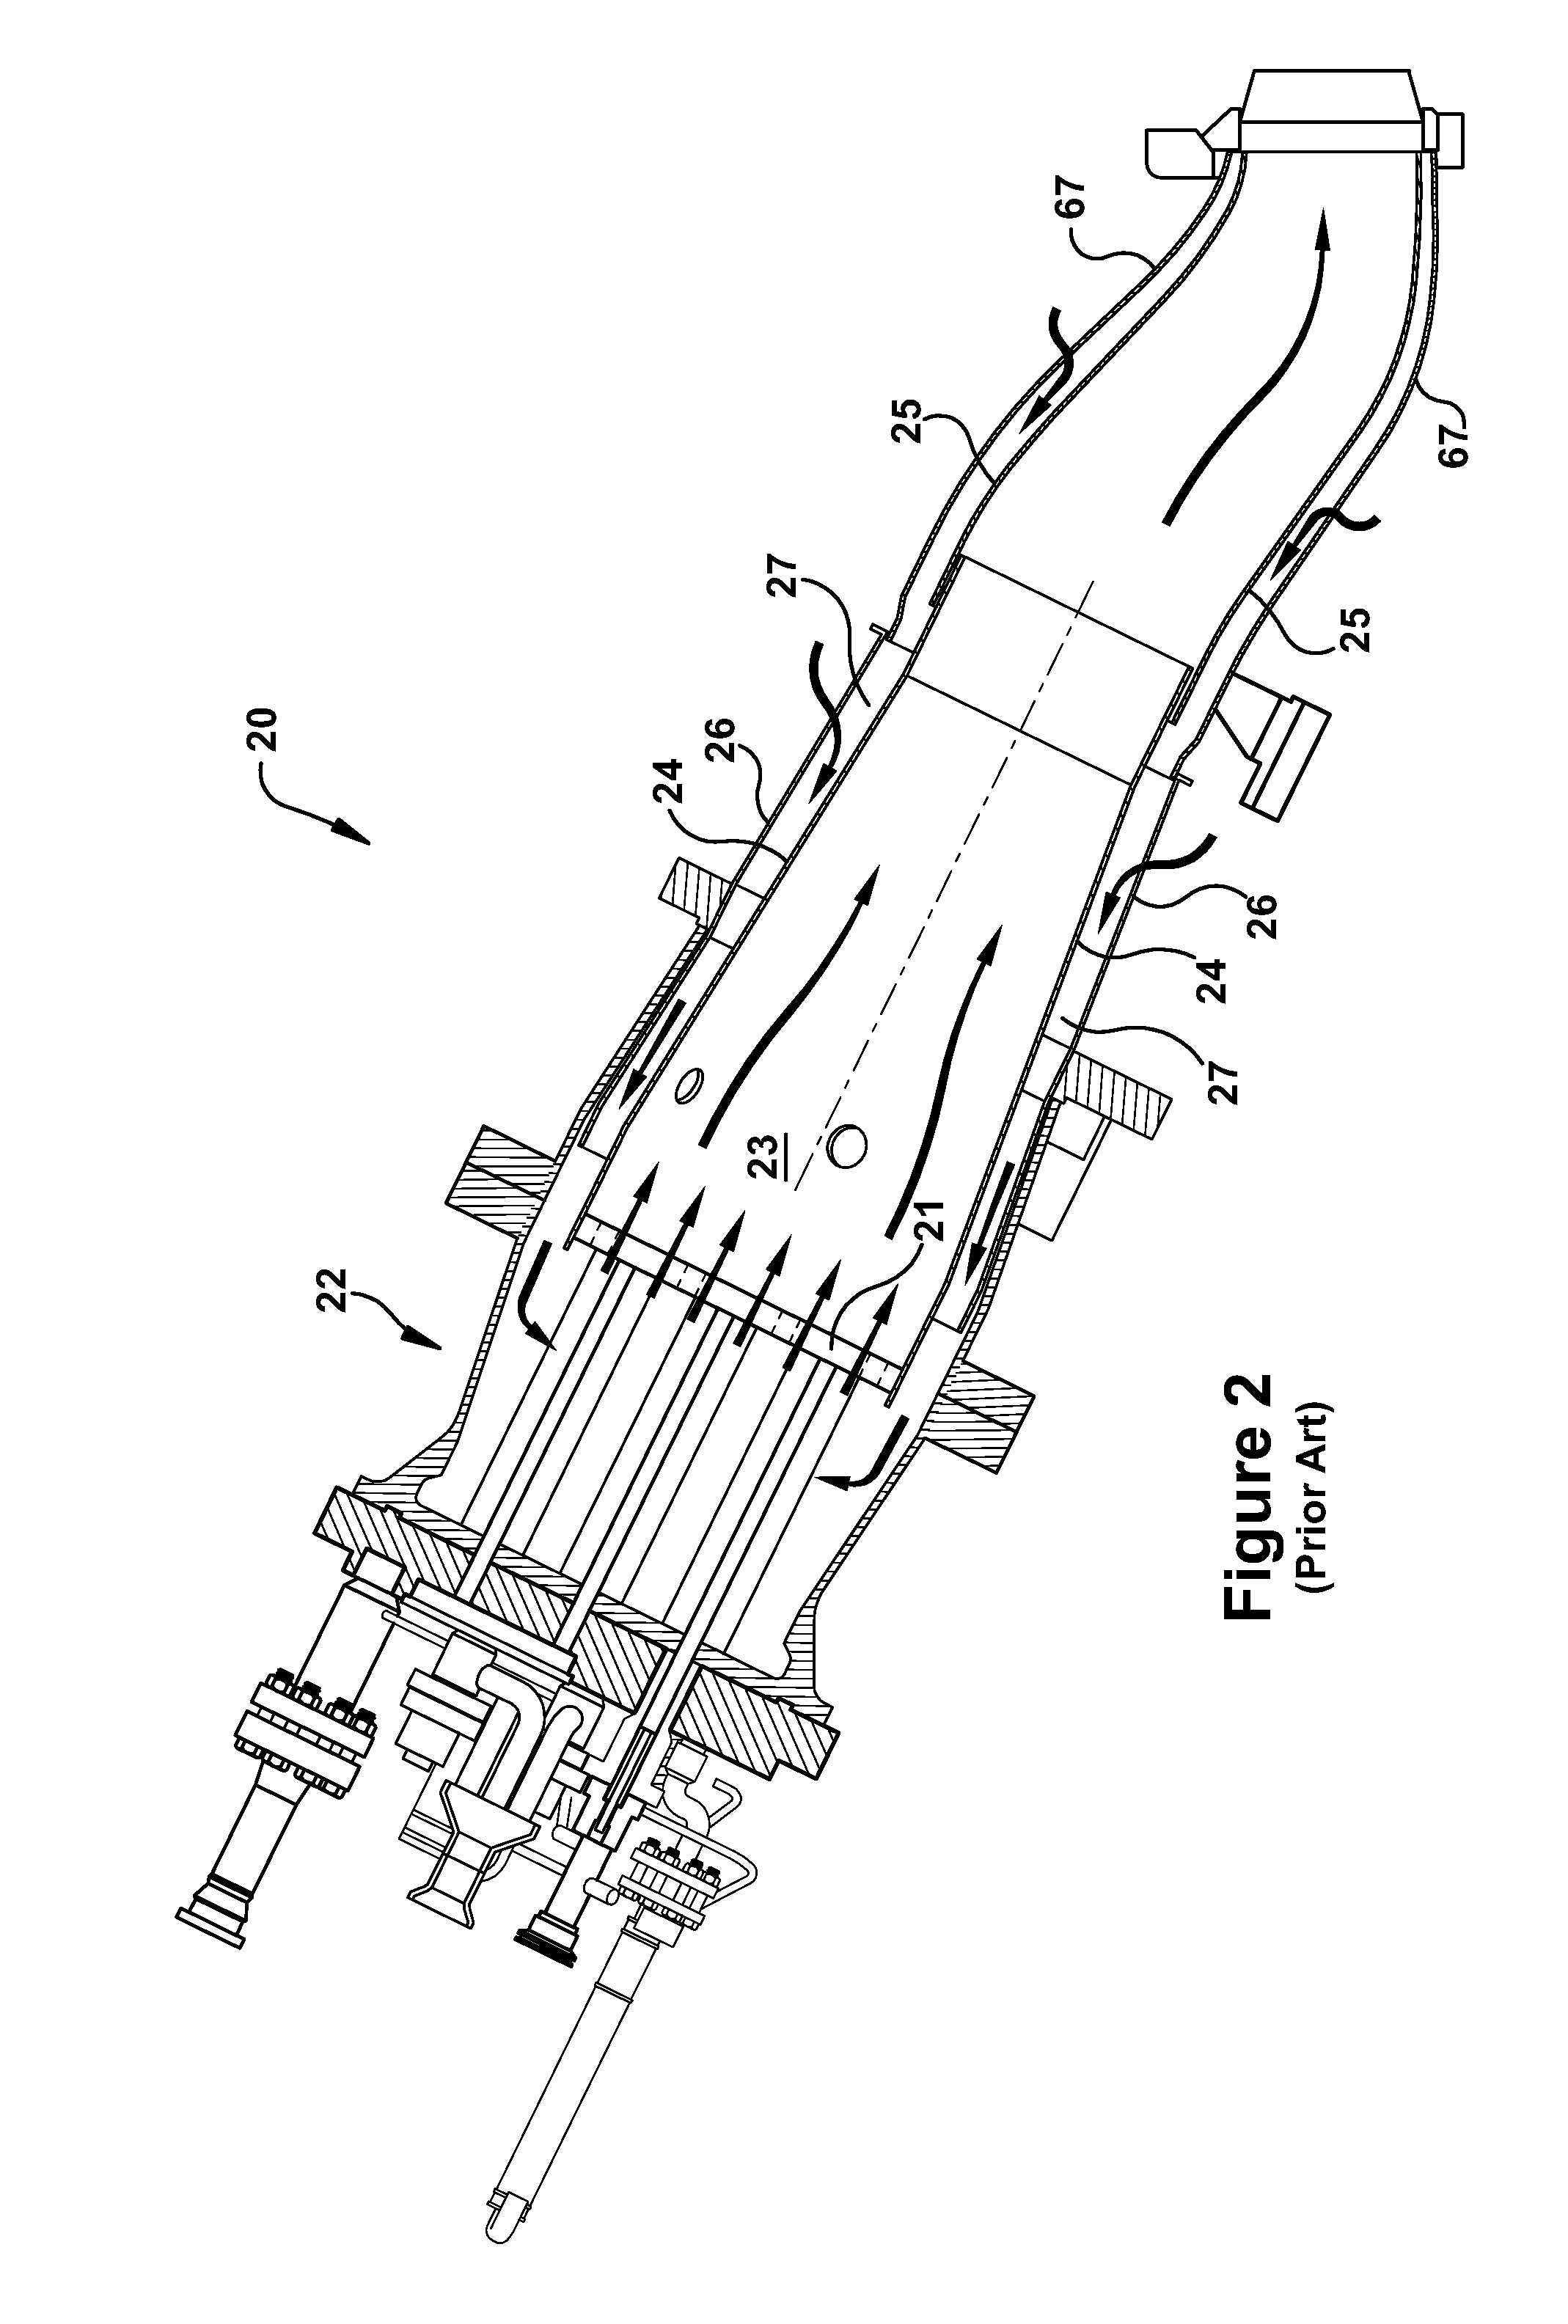 Fuel injection assemblies in combustion turbine engines